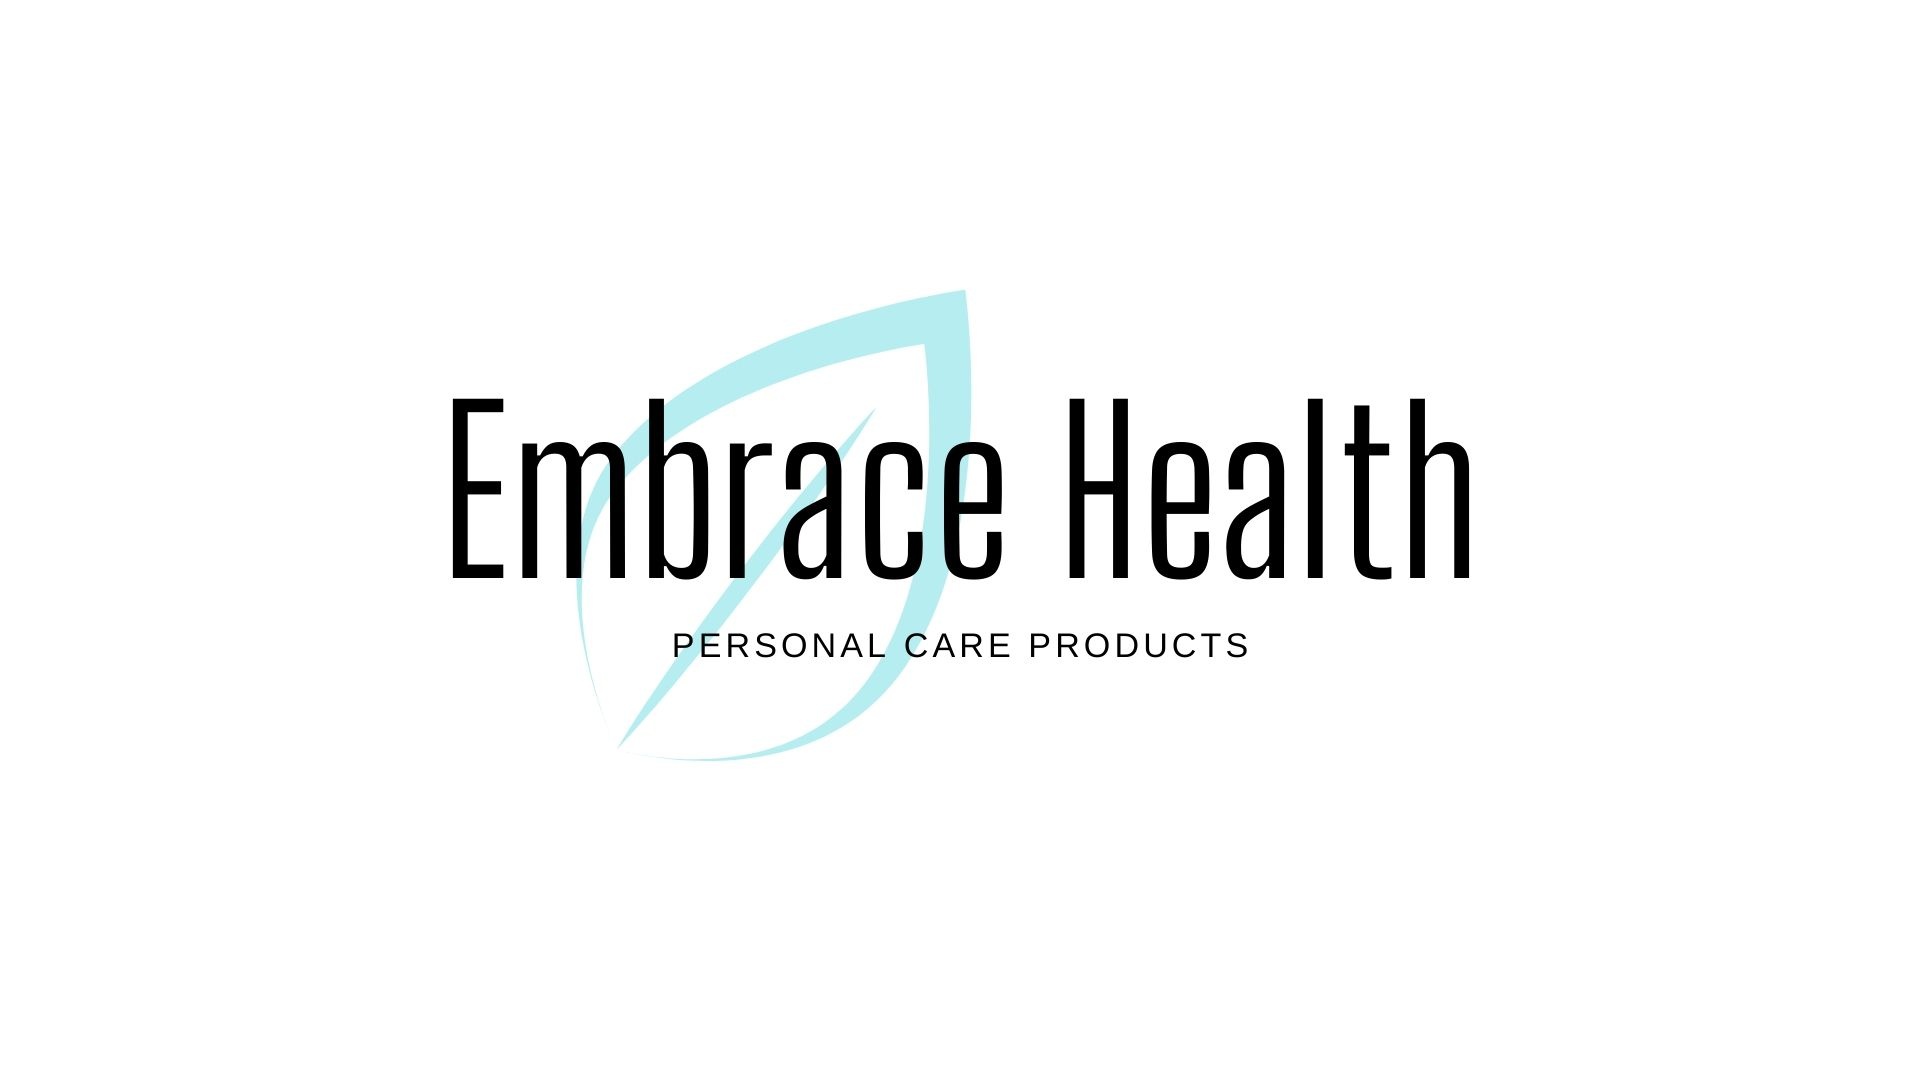 Embrace Health Personal Care Products